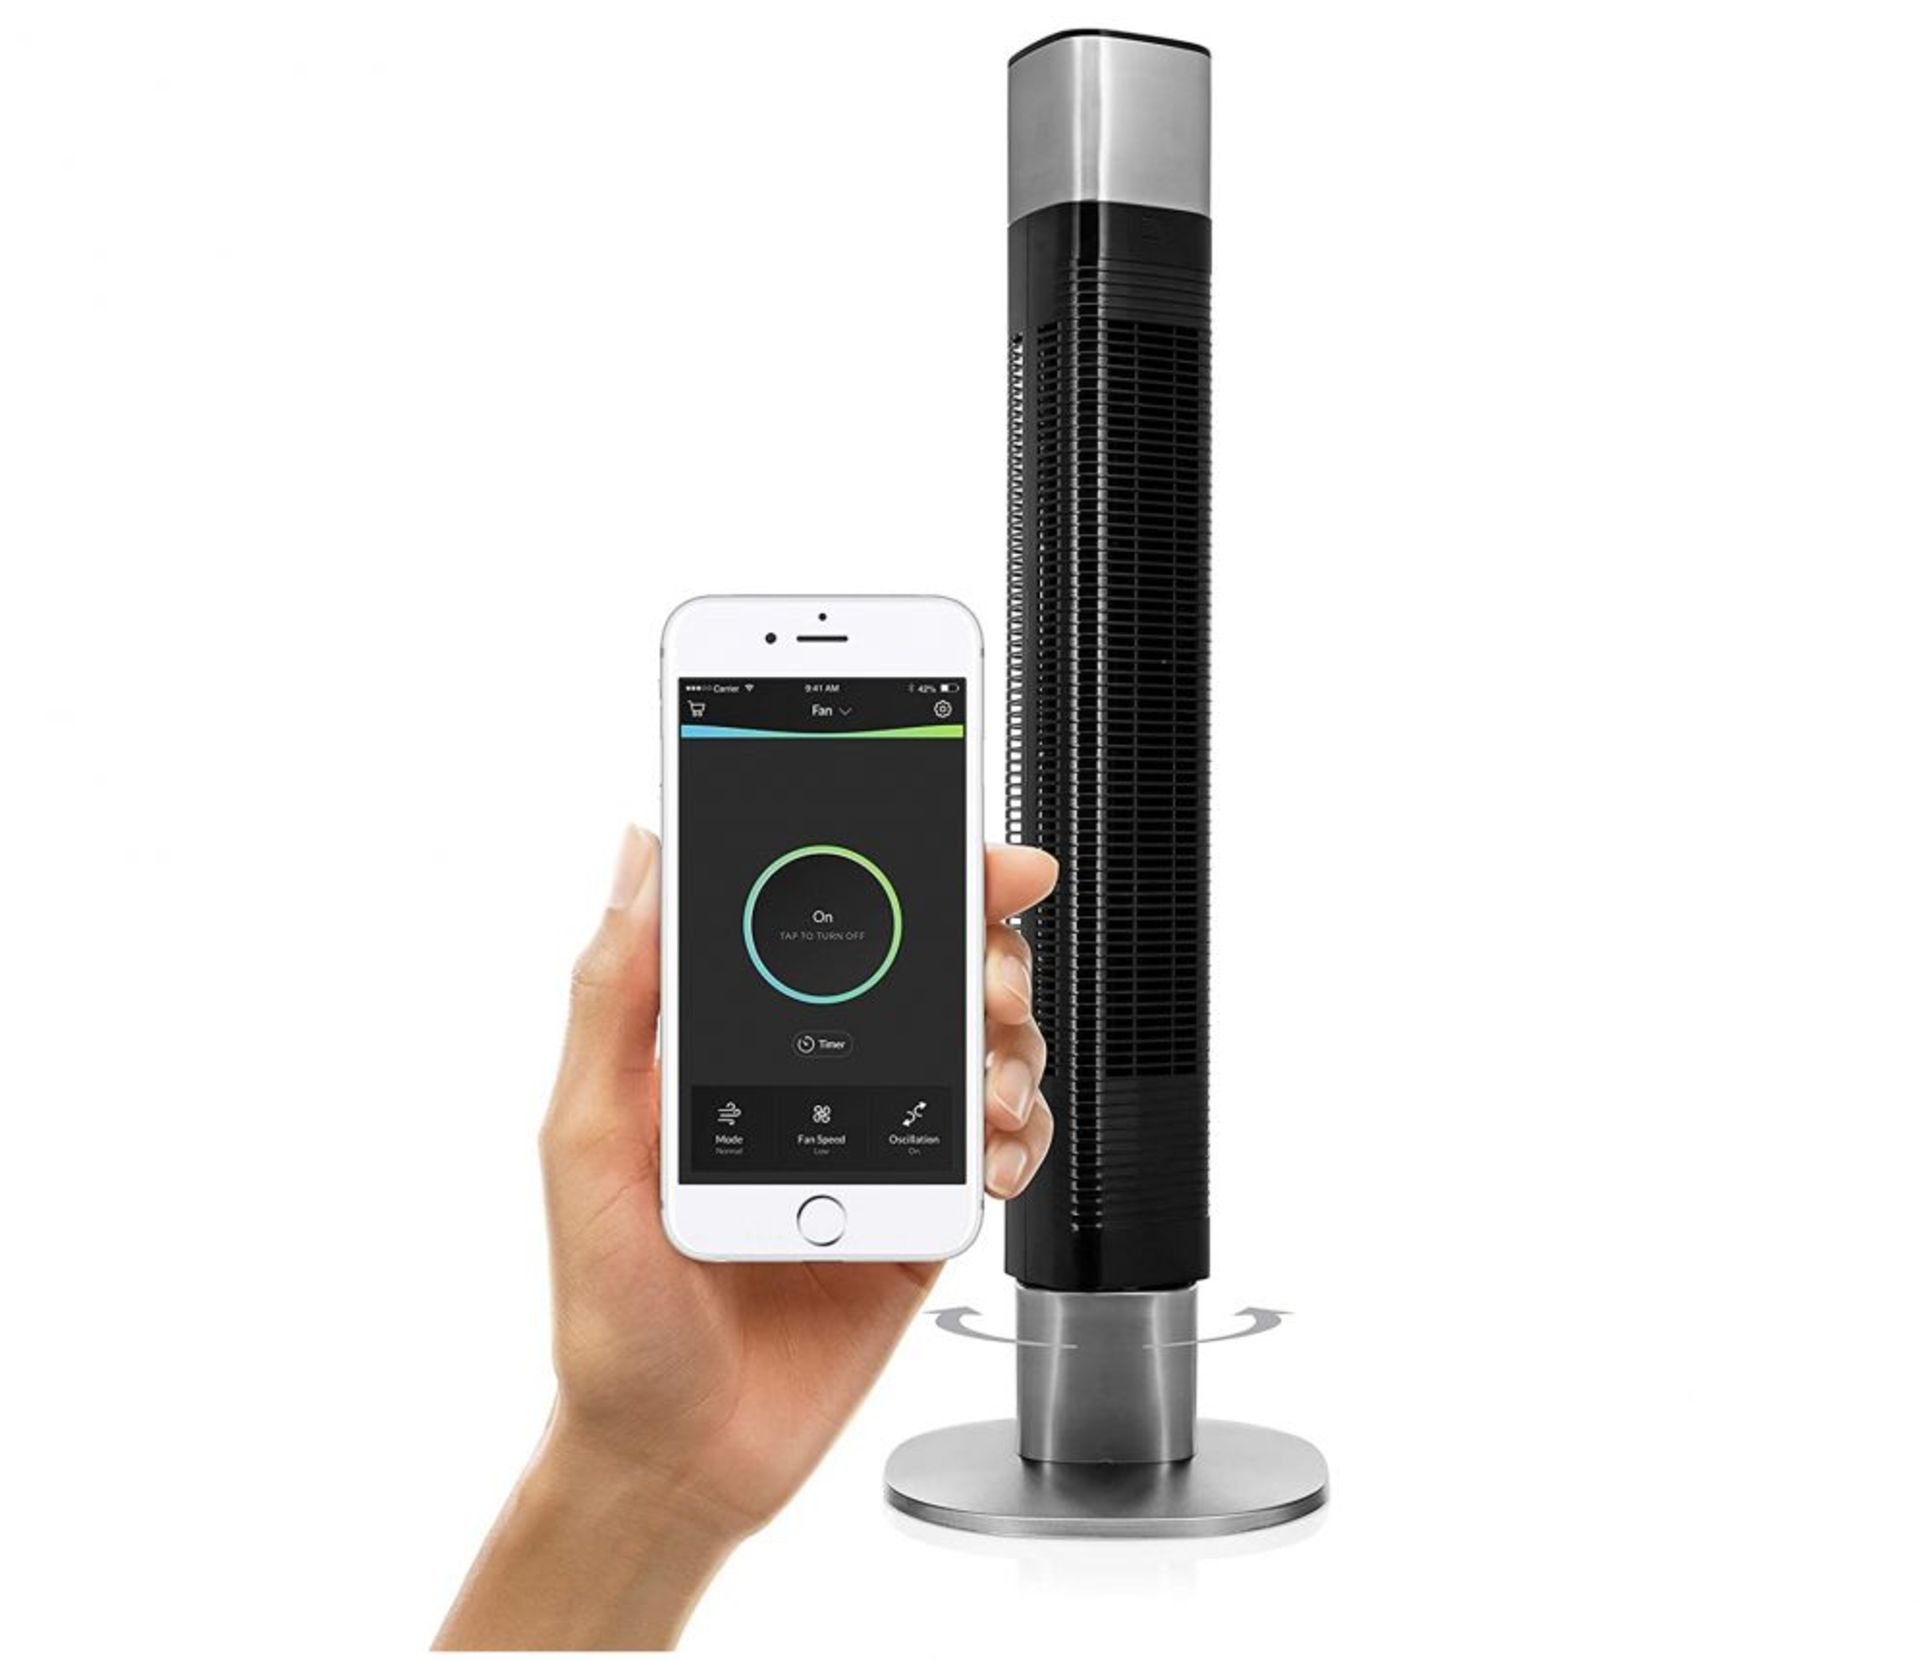 1 x PRINCESS 350000 Smart Tower Fan - Black. RRP £119.99 EACH. Control remotely from your phone 3